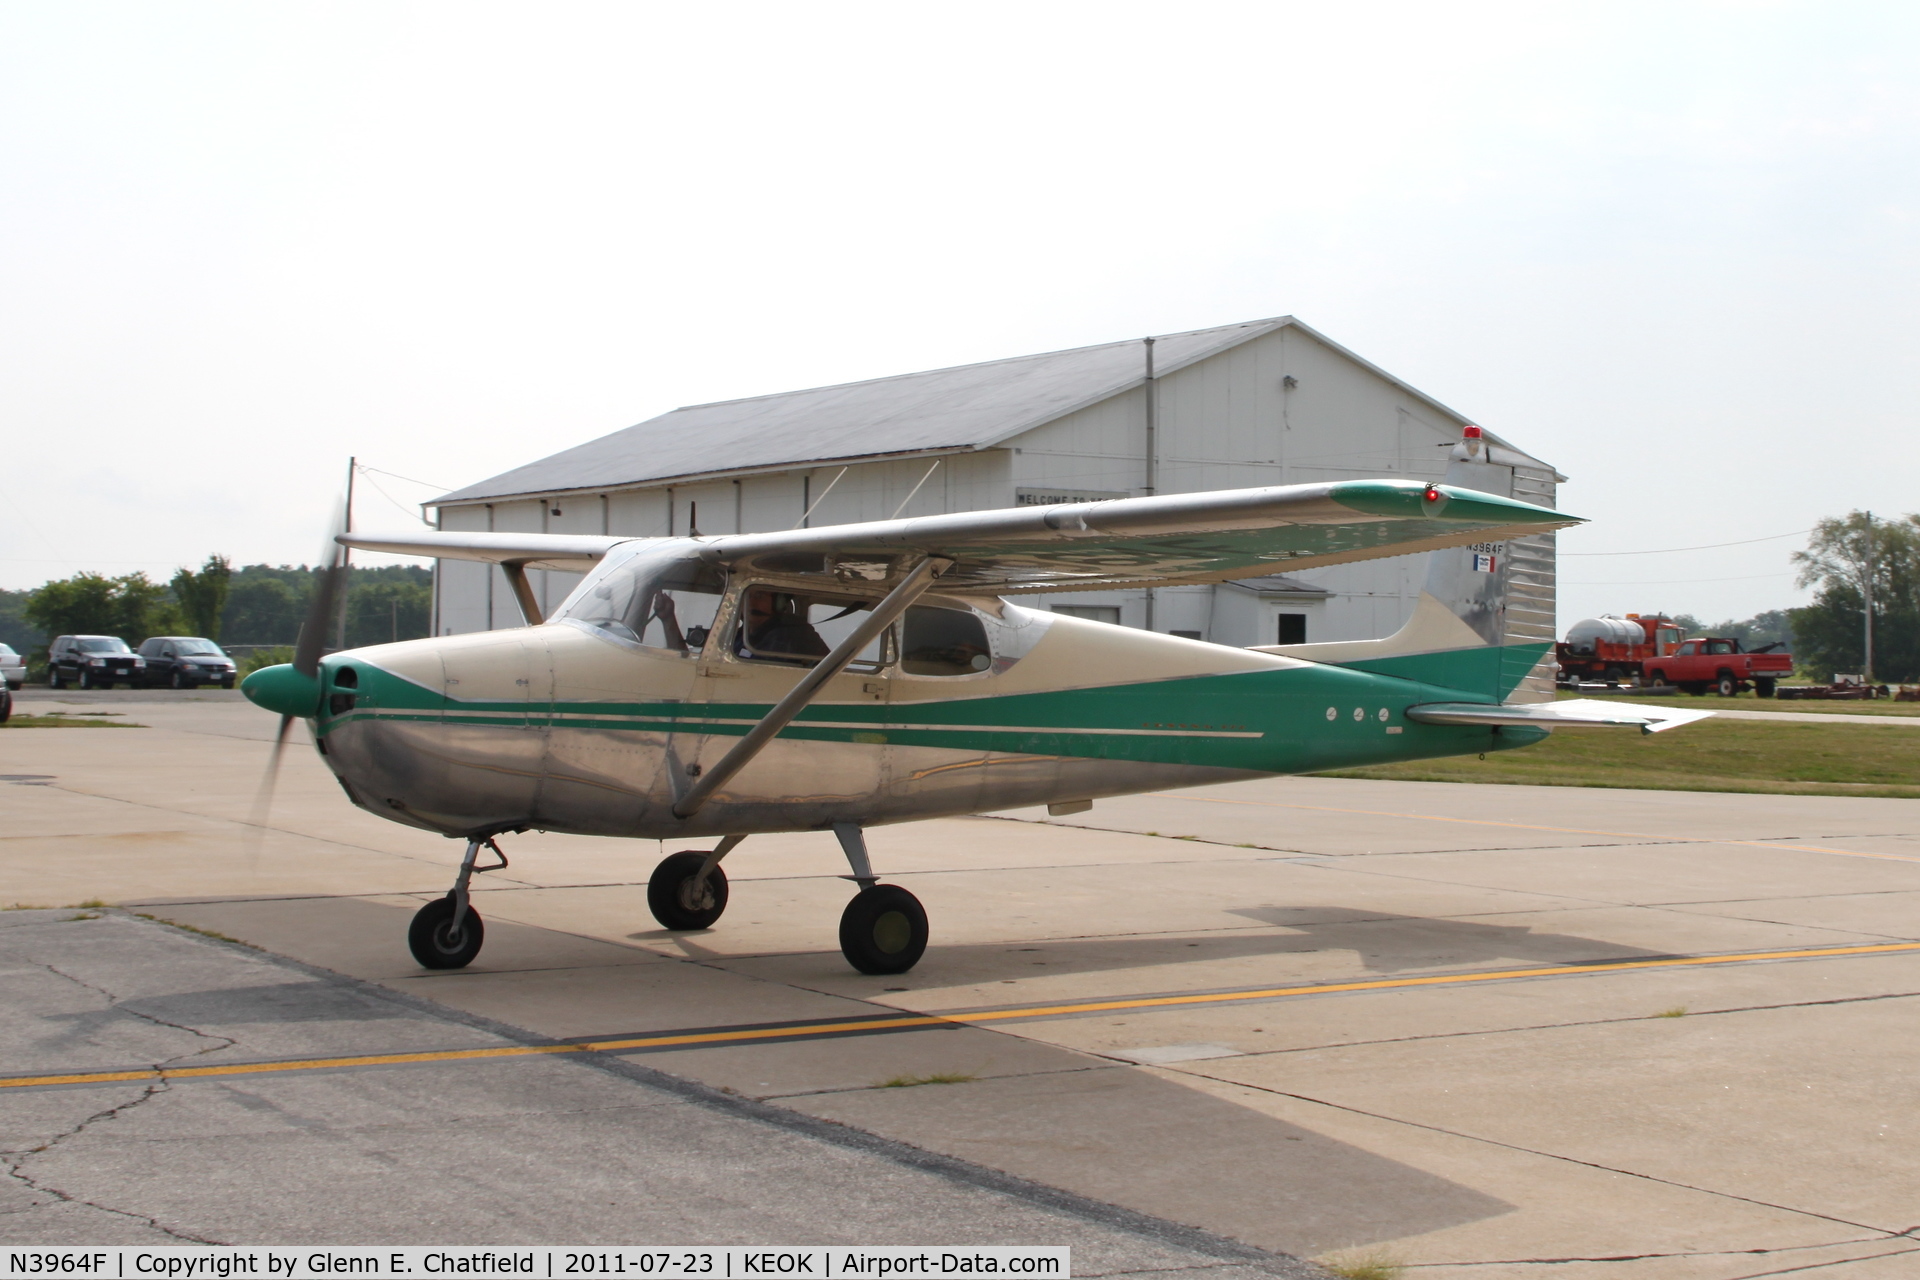 N3964F, 1958 Cessna 172 C/N 36864, Taxiing for departure